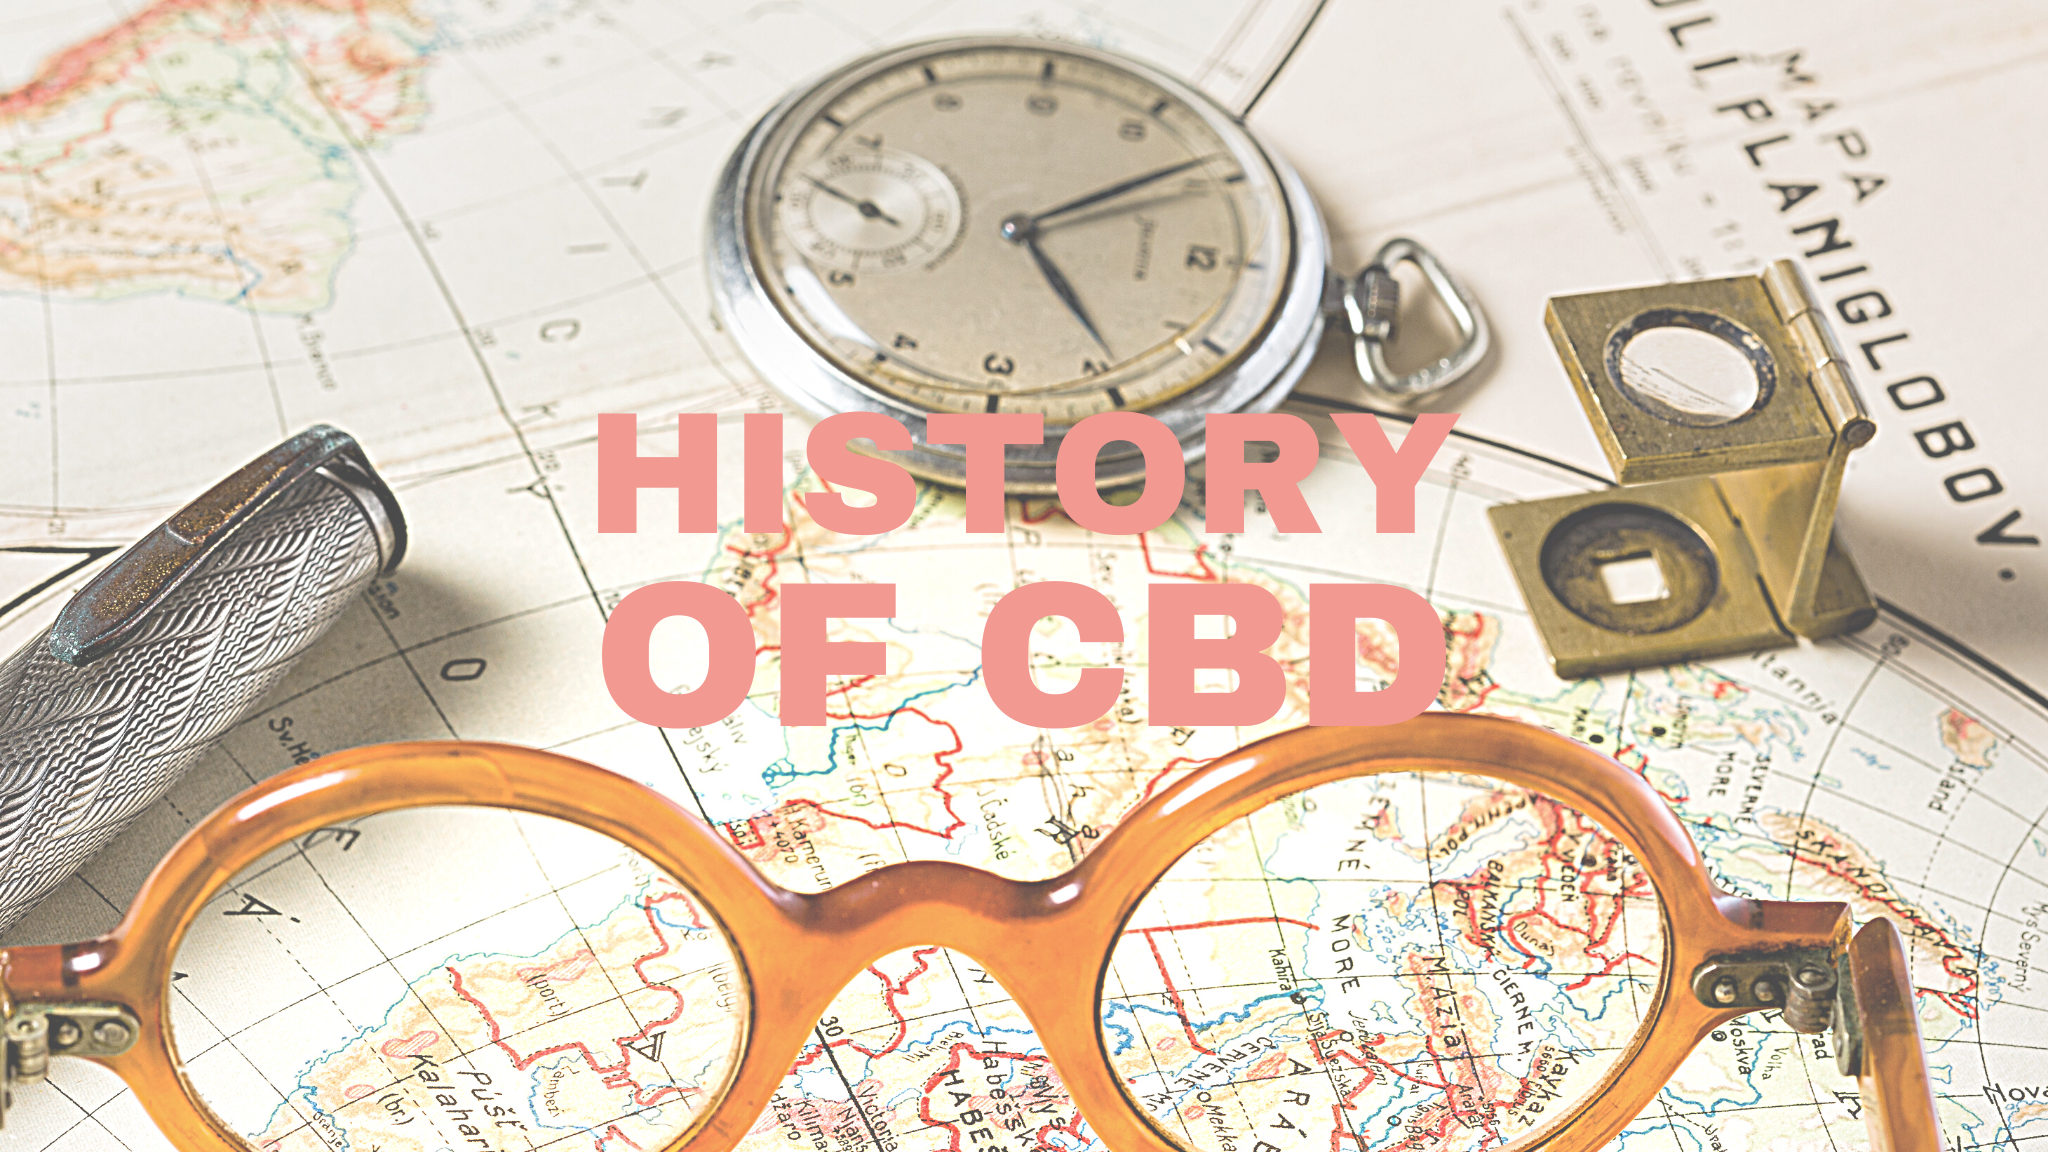 The History of CBD: From Origin to Modern Day Applications